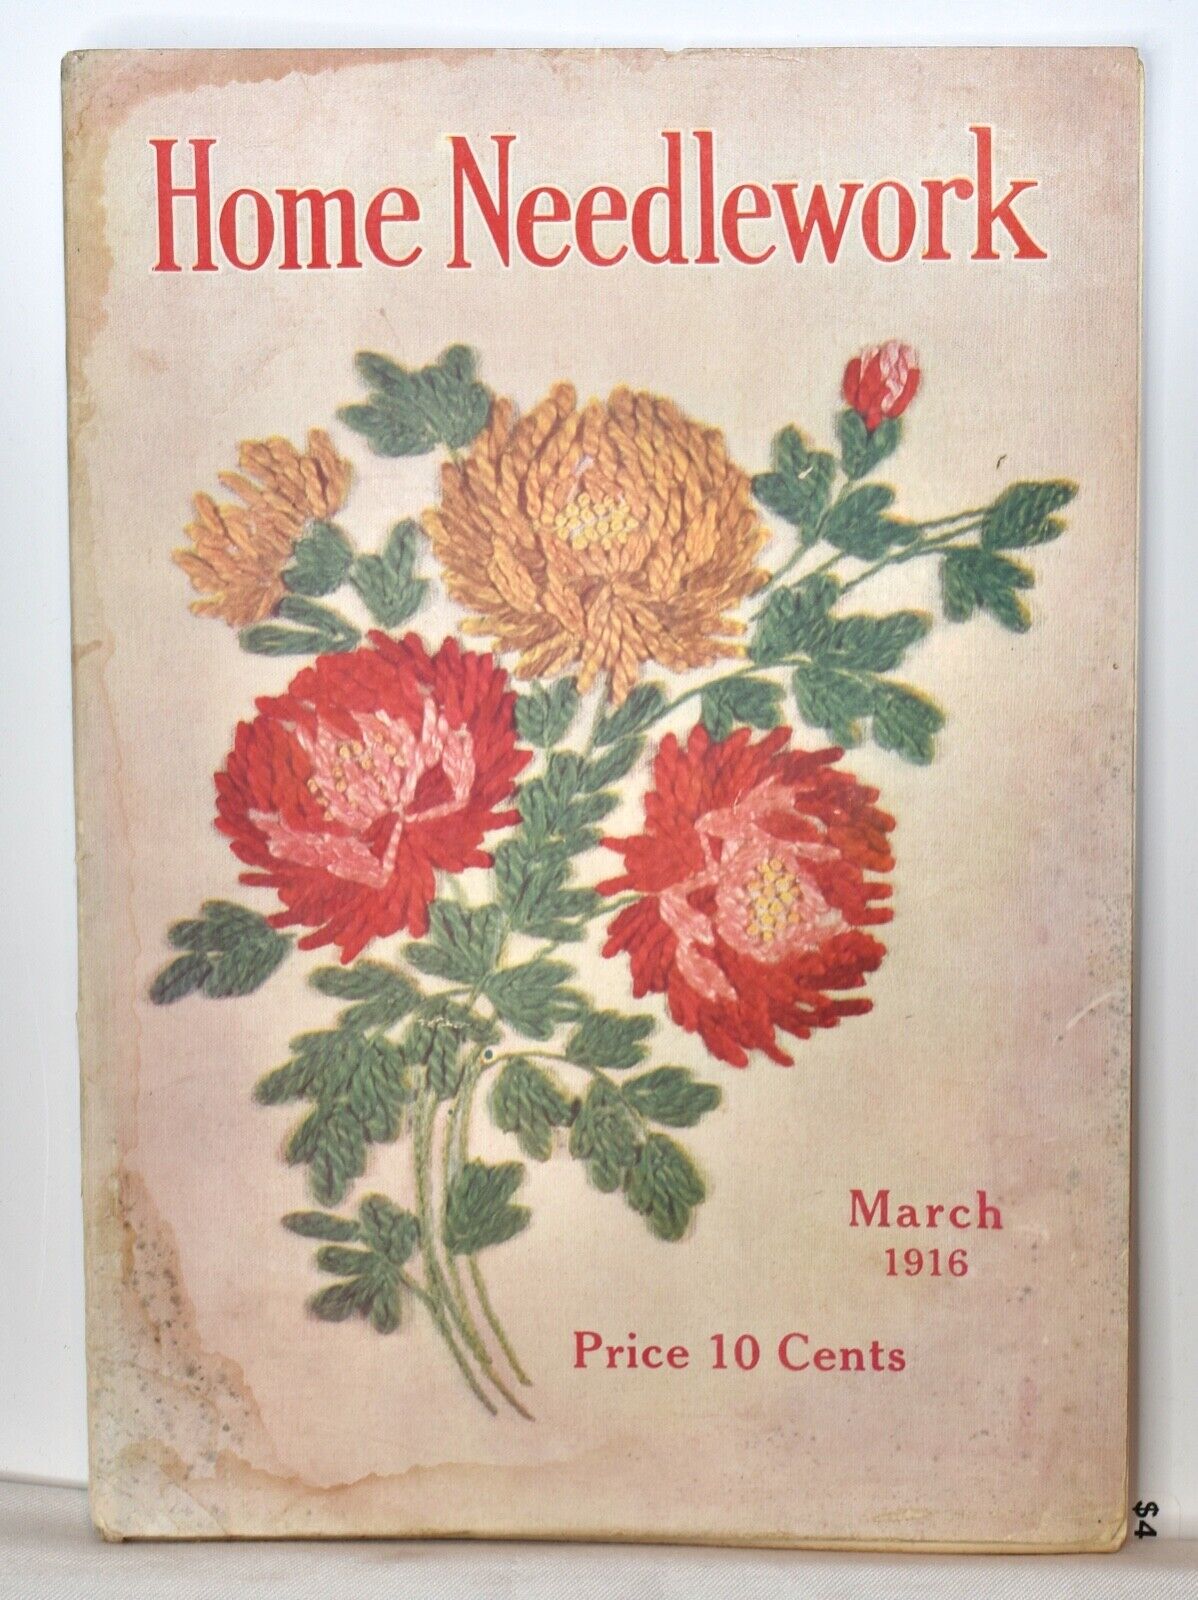 Home Needlework Magazine - March 1916 crochet embroidery